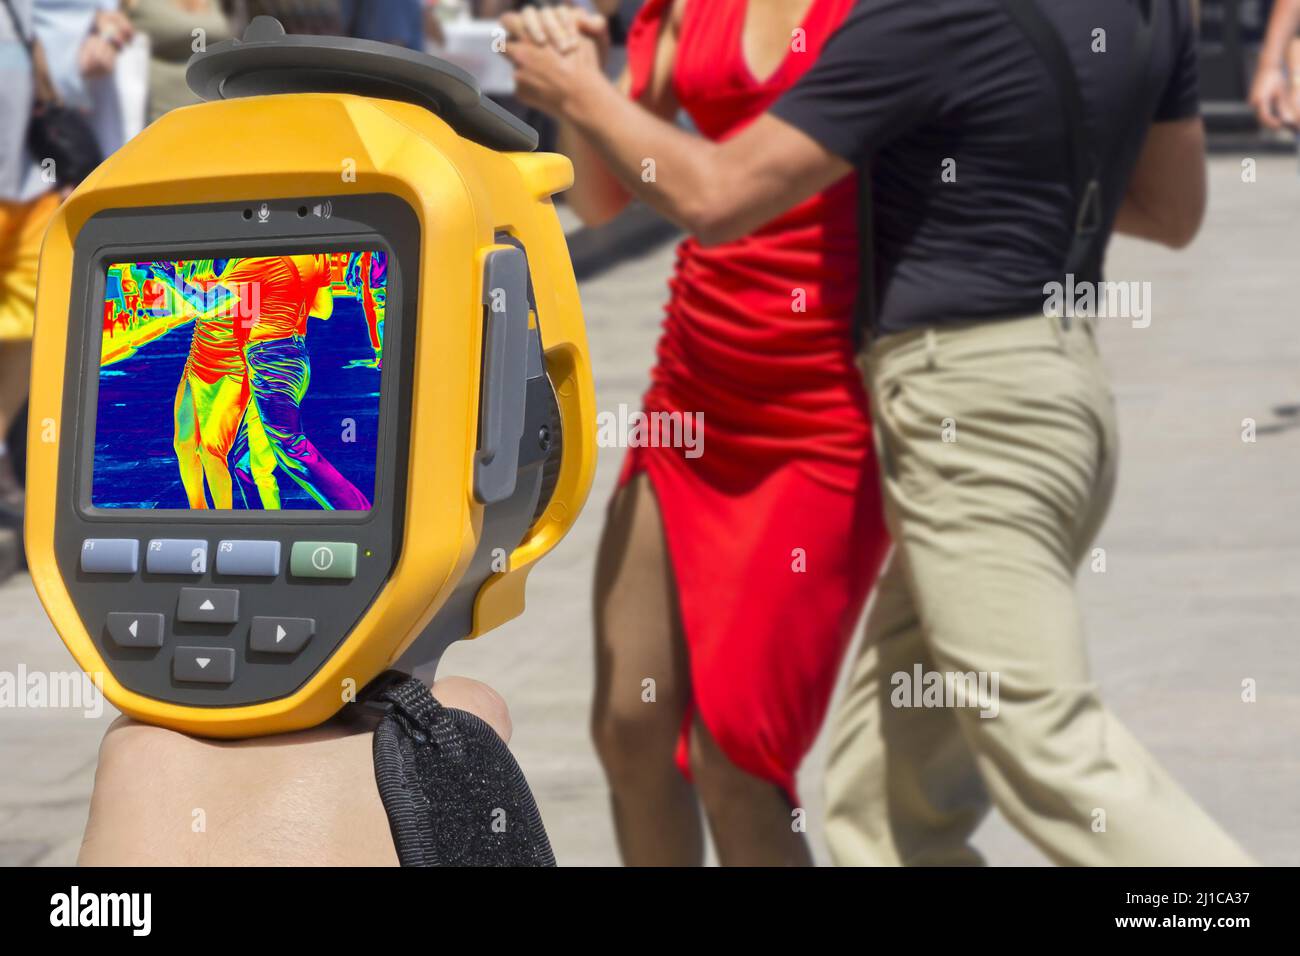 Recording Street dancers performing tango, With Infrared Thermal Camera Stock Photo